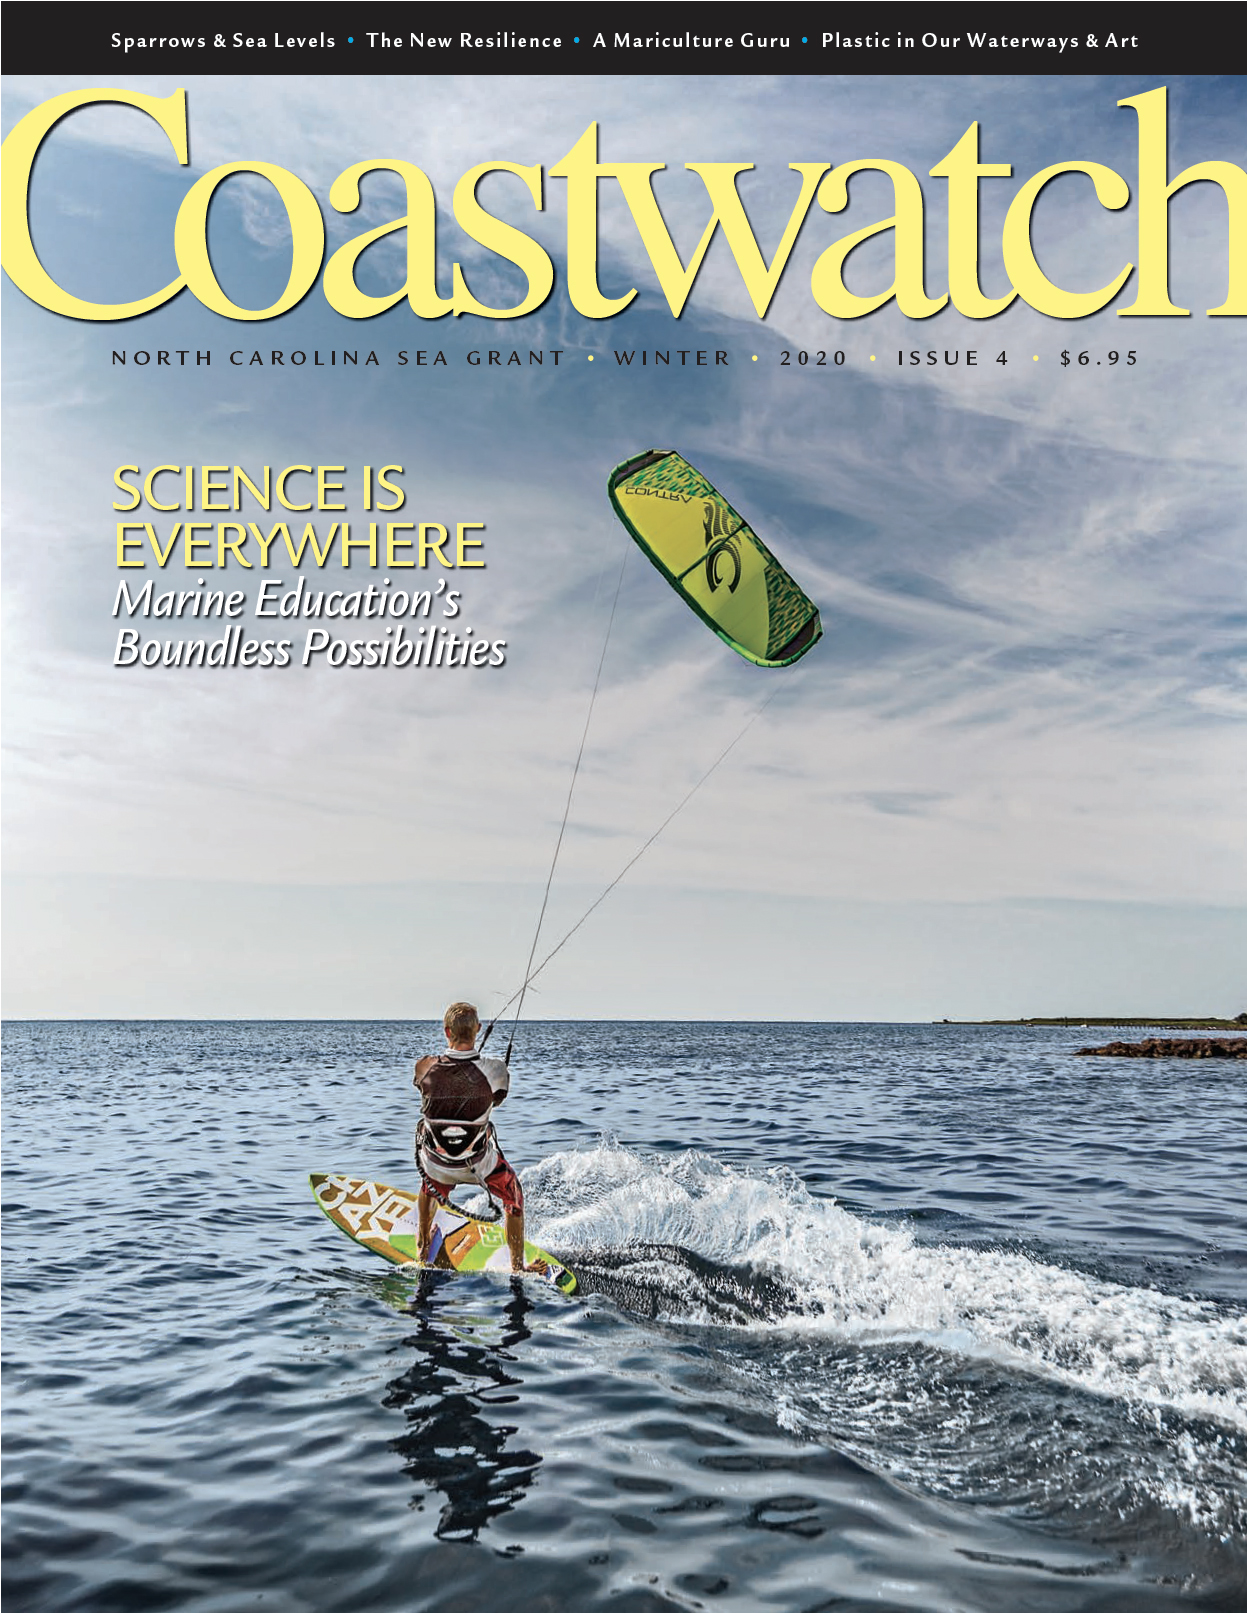 The Winter issue closes another award-winning year for Coastwatch, which earned five state and national honors.